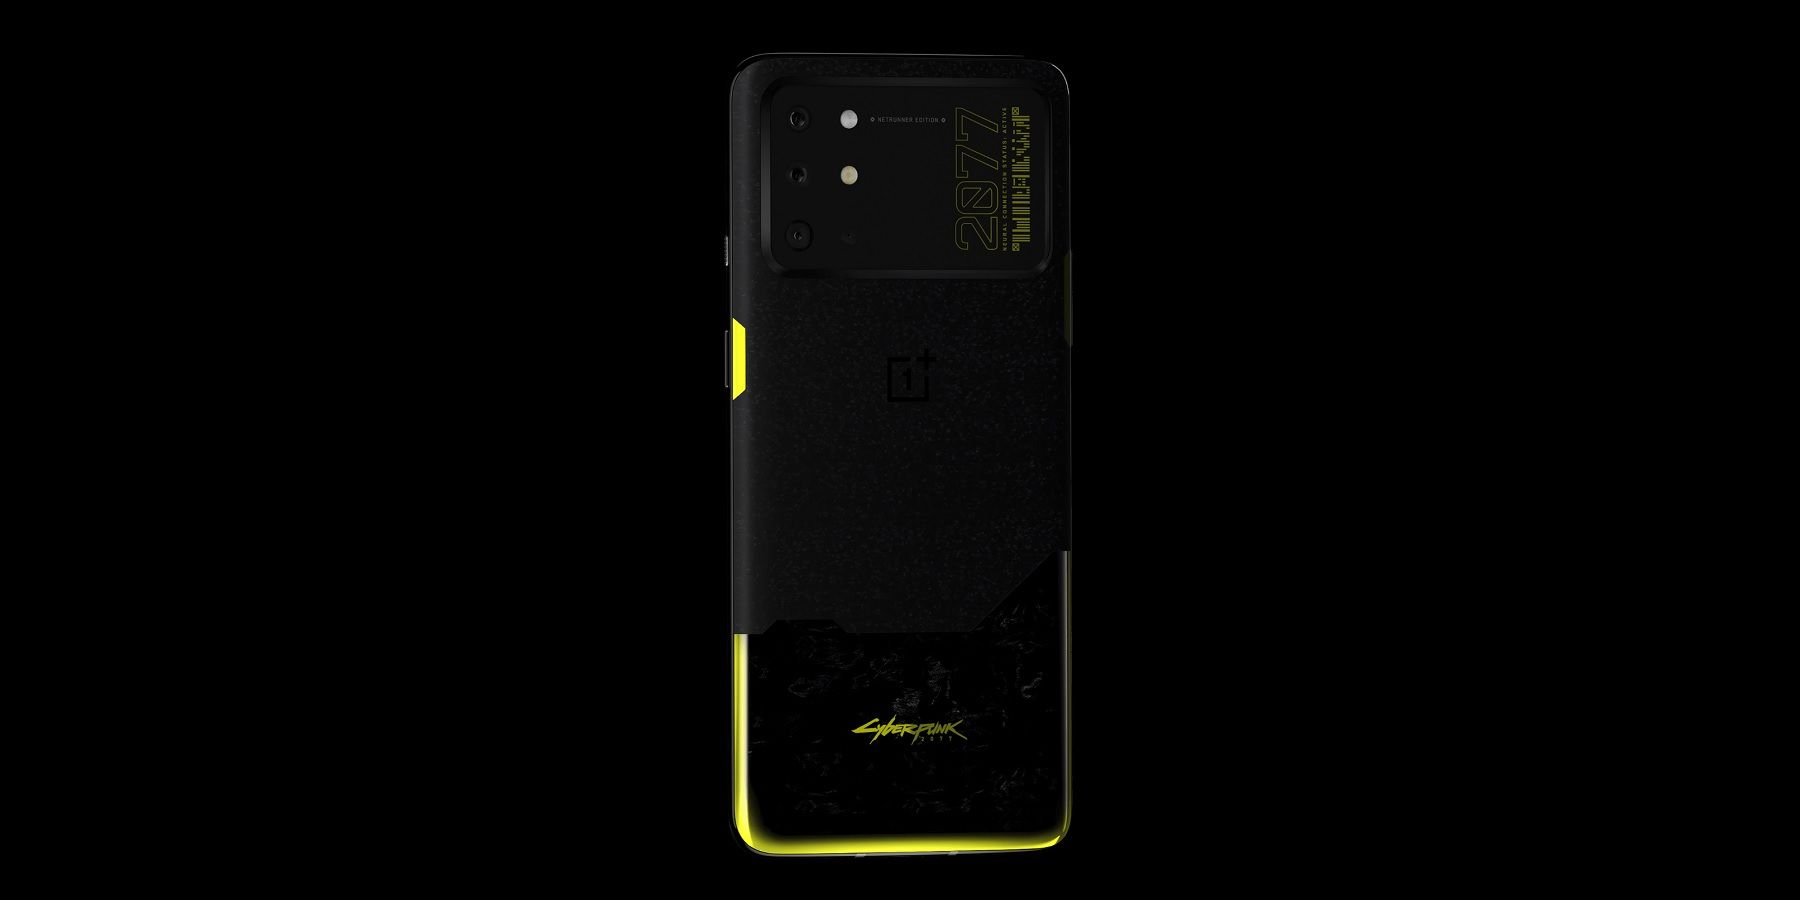 OnePlus 8T Cyberpunk 2077 Edition Looks Great But Not Everyone Can Buy One